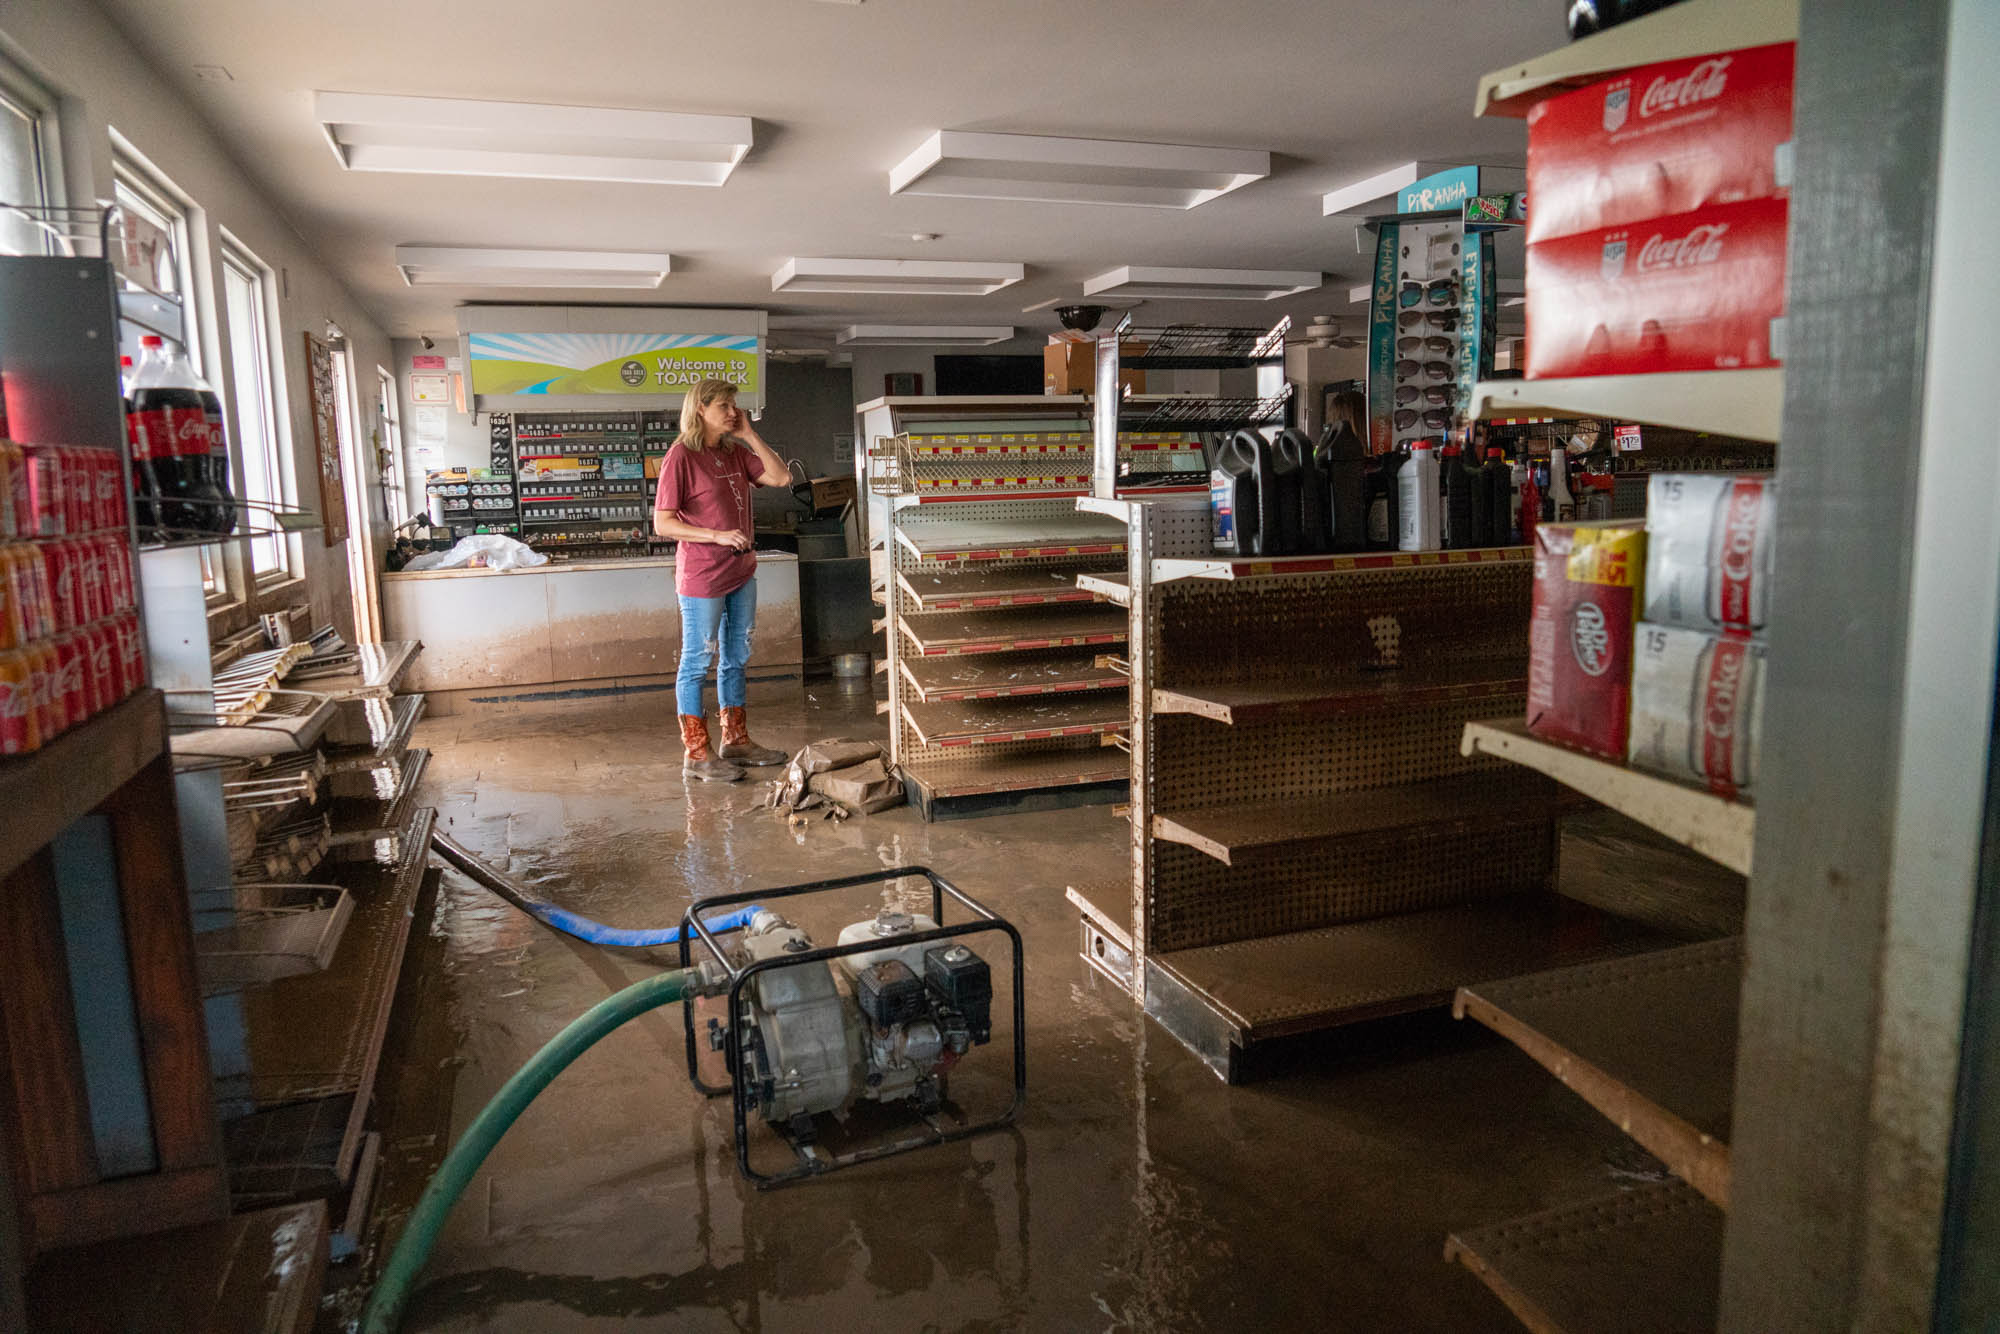 The Arkansas River overflowed its banks this year, though Jason and Christy Trantina, owners of the Toad Suck One-Stop, tried in vain to stop the deluge with concrete blocks. (Jordan Laird/News21)